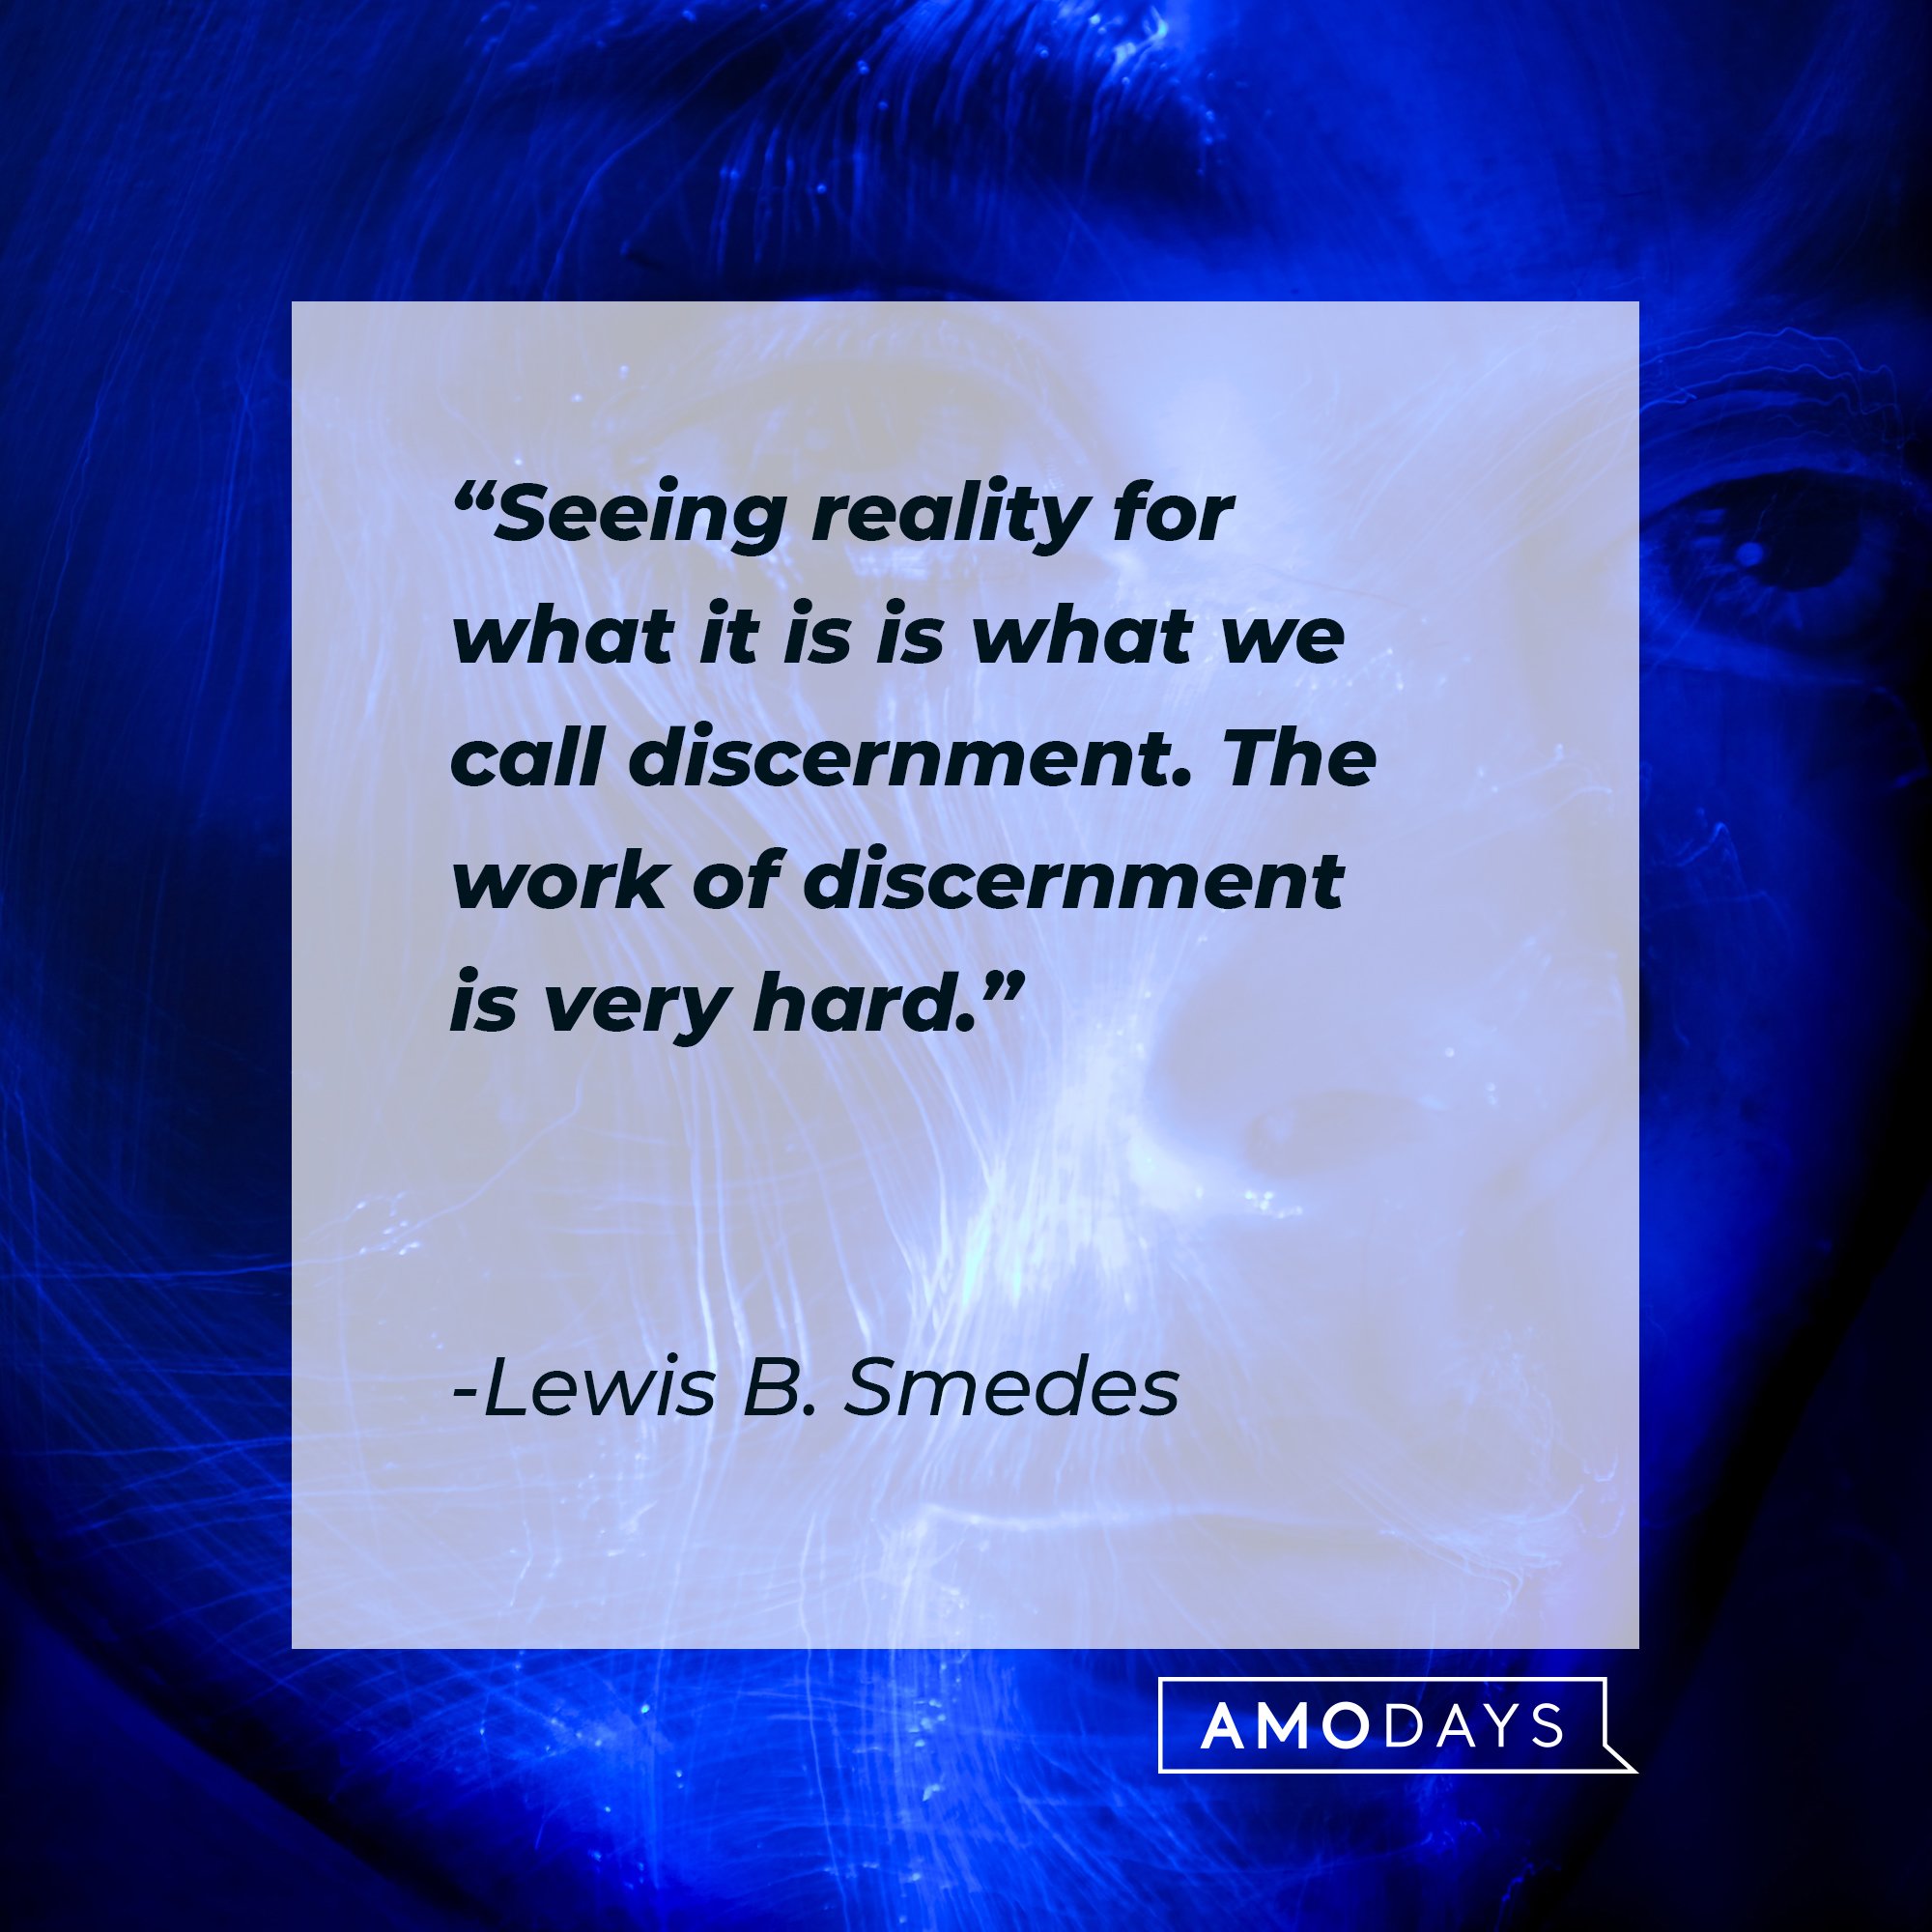 Lewis B. Smedes’ quote: "Seeing reality for what it is is what we call discernment. The work of discernment is very hard." | Image: AmoDays